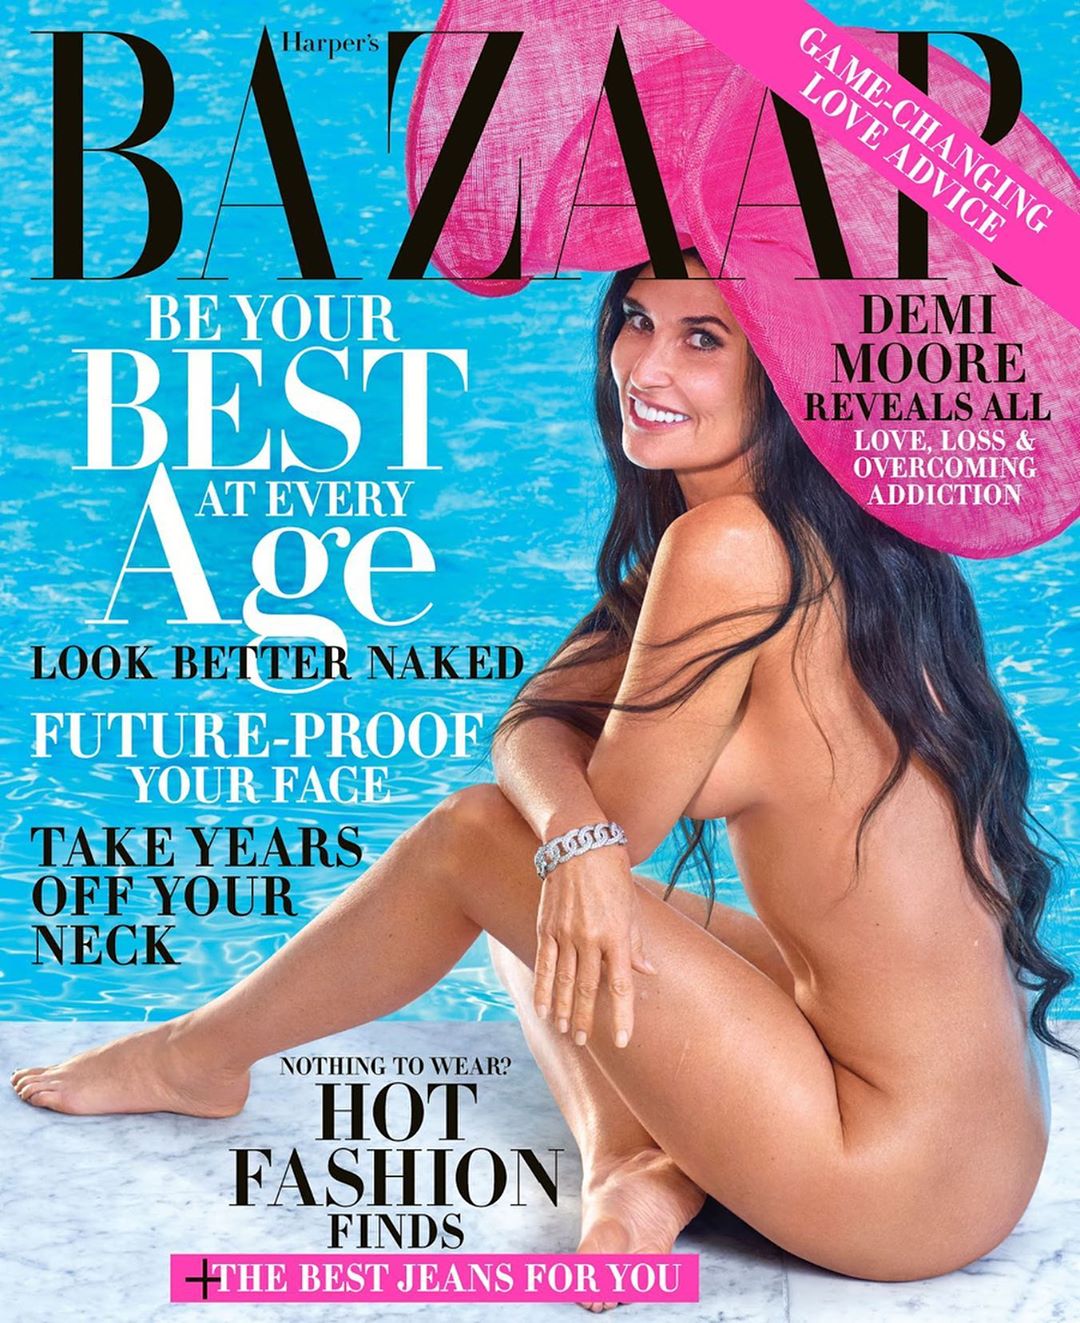 Actress Demi Moore poses nude for the cover of magazine, shares shocking things